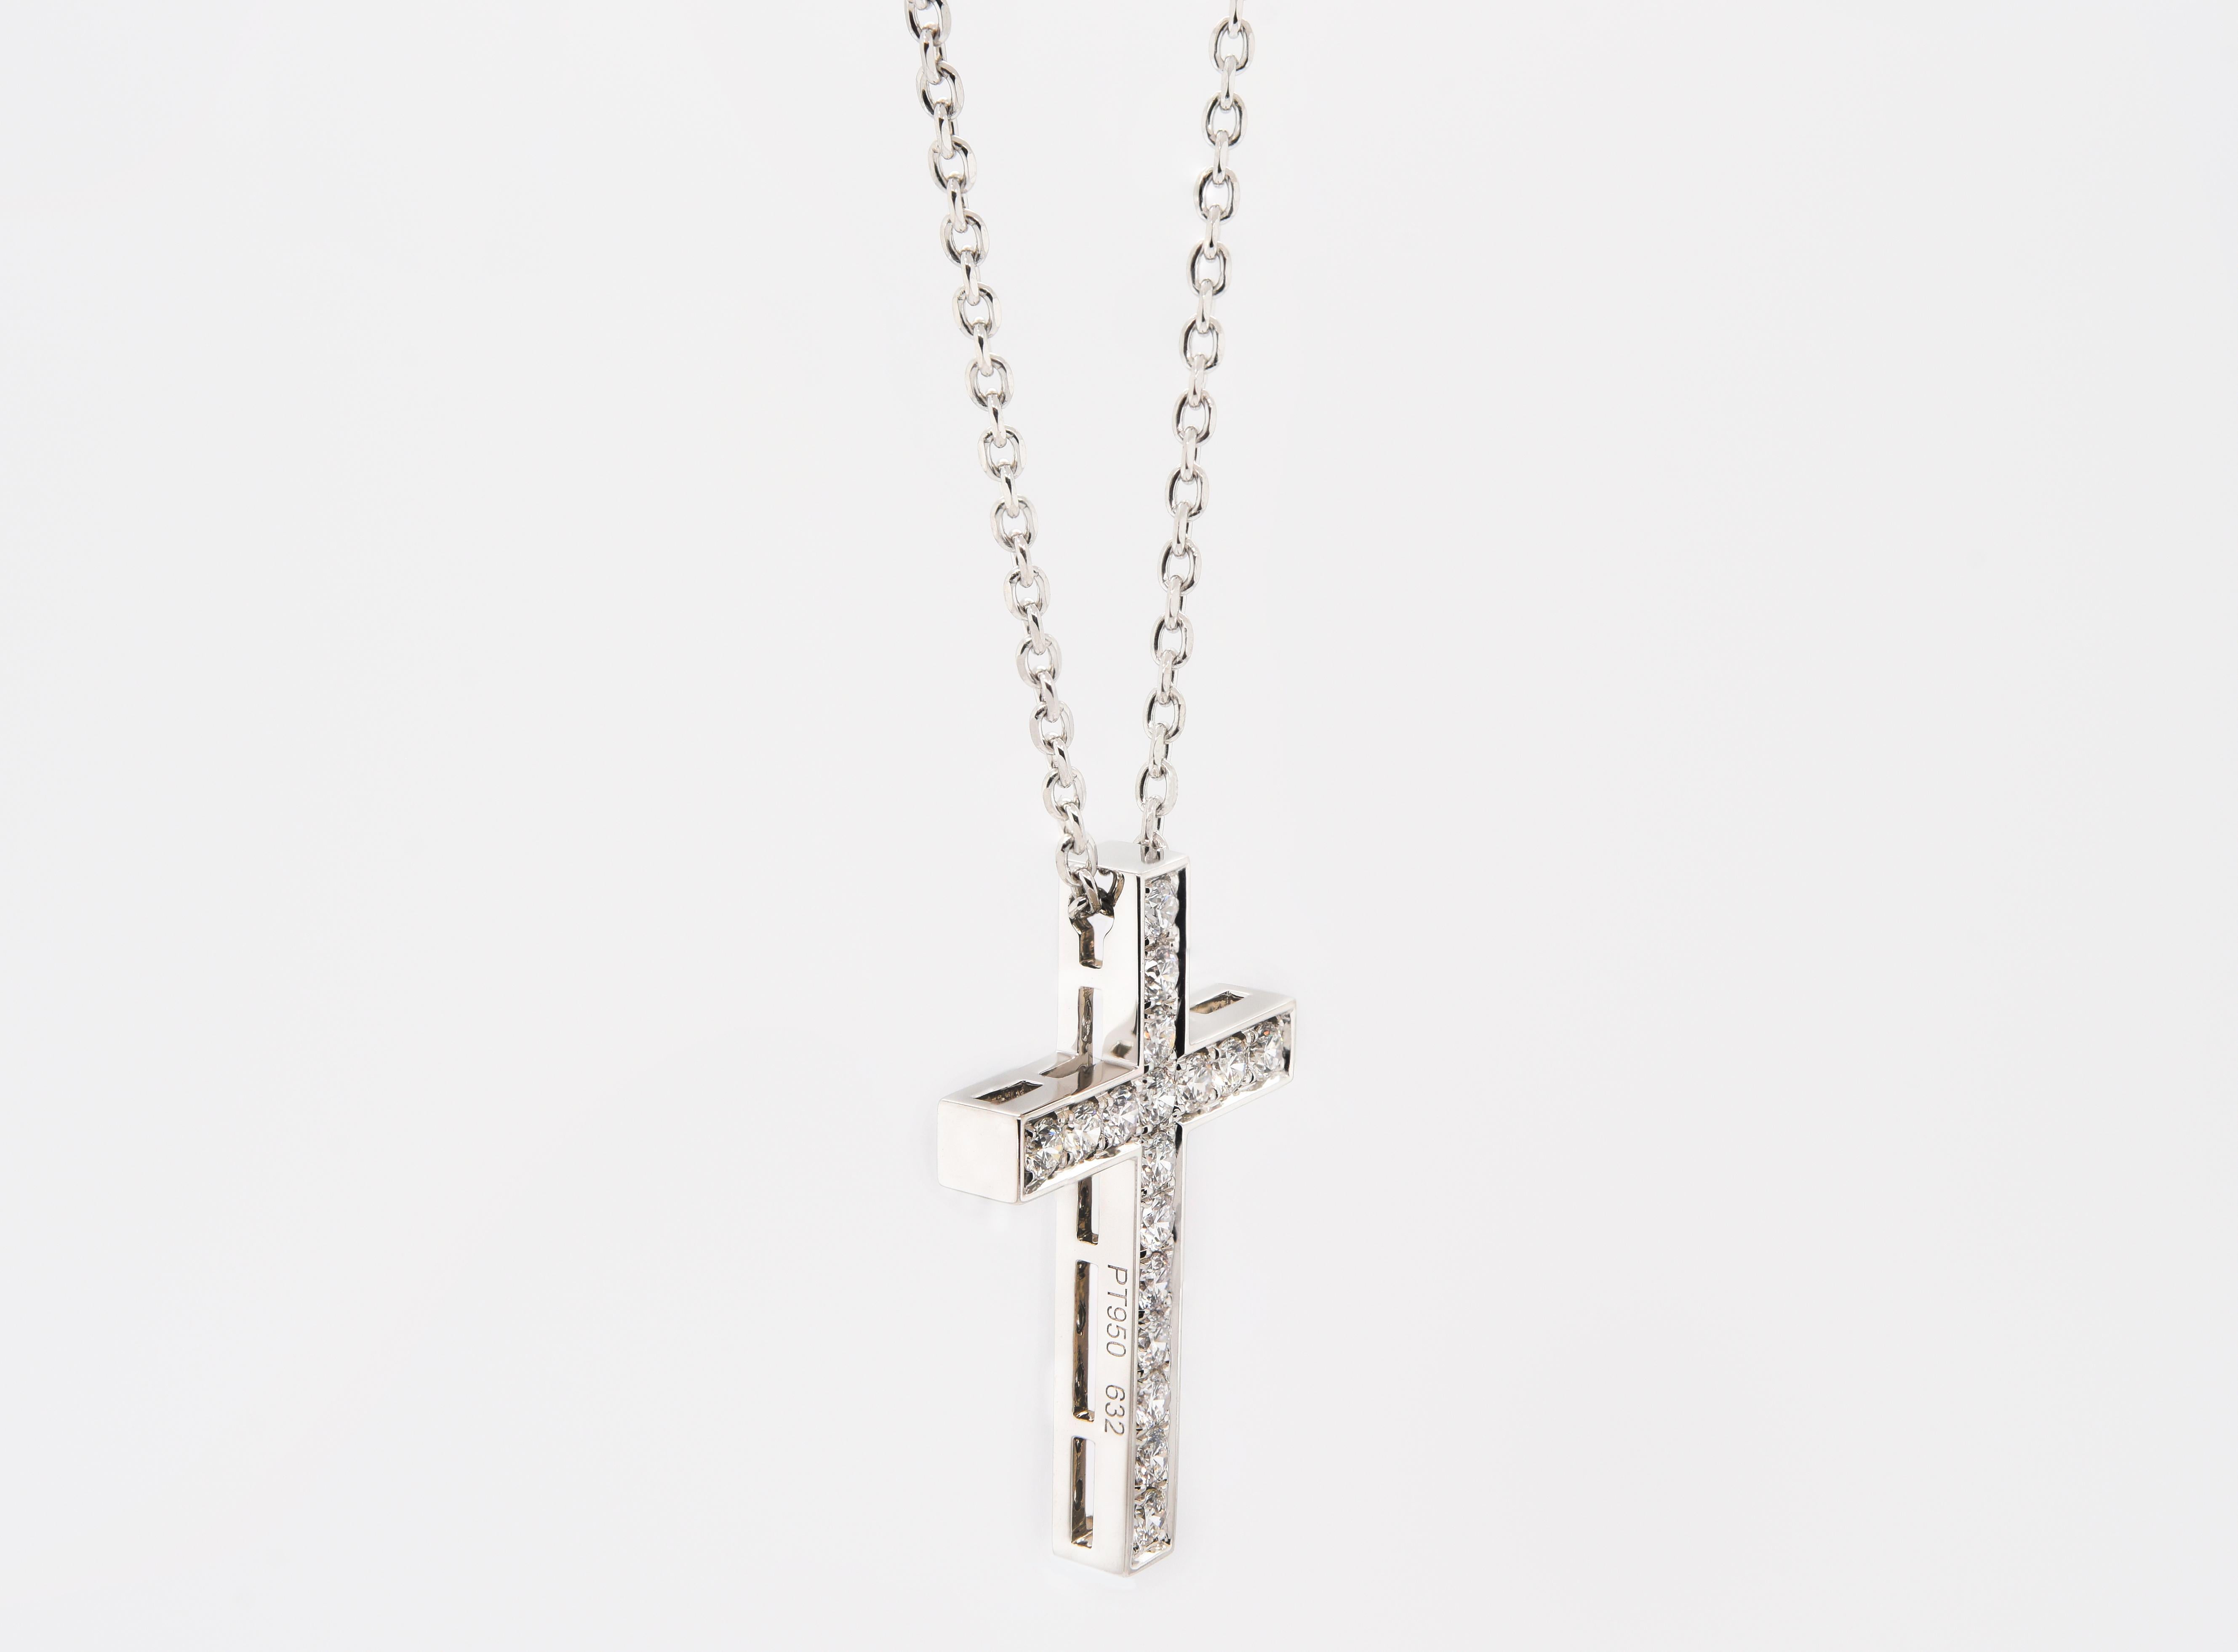 Diamond cross with .30pts in diamonds set in 2 grams of platinum on a platinum chain. This Cross can be custom made in any gemstone.